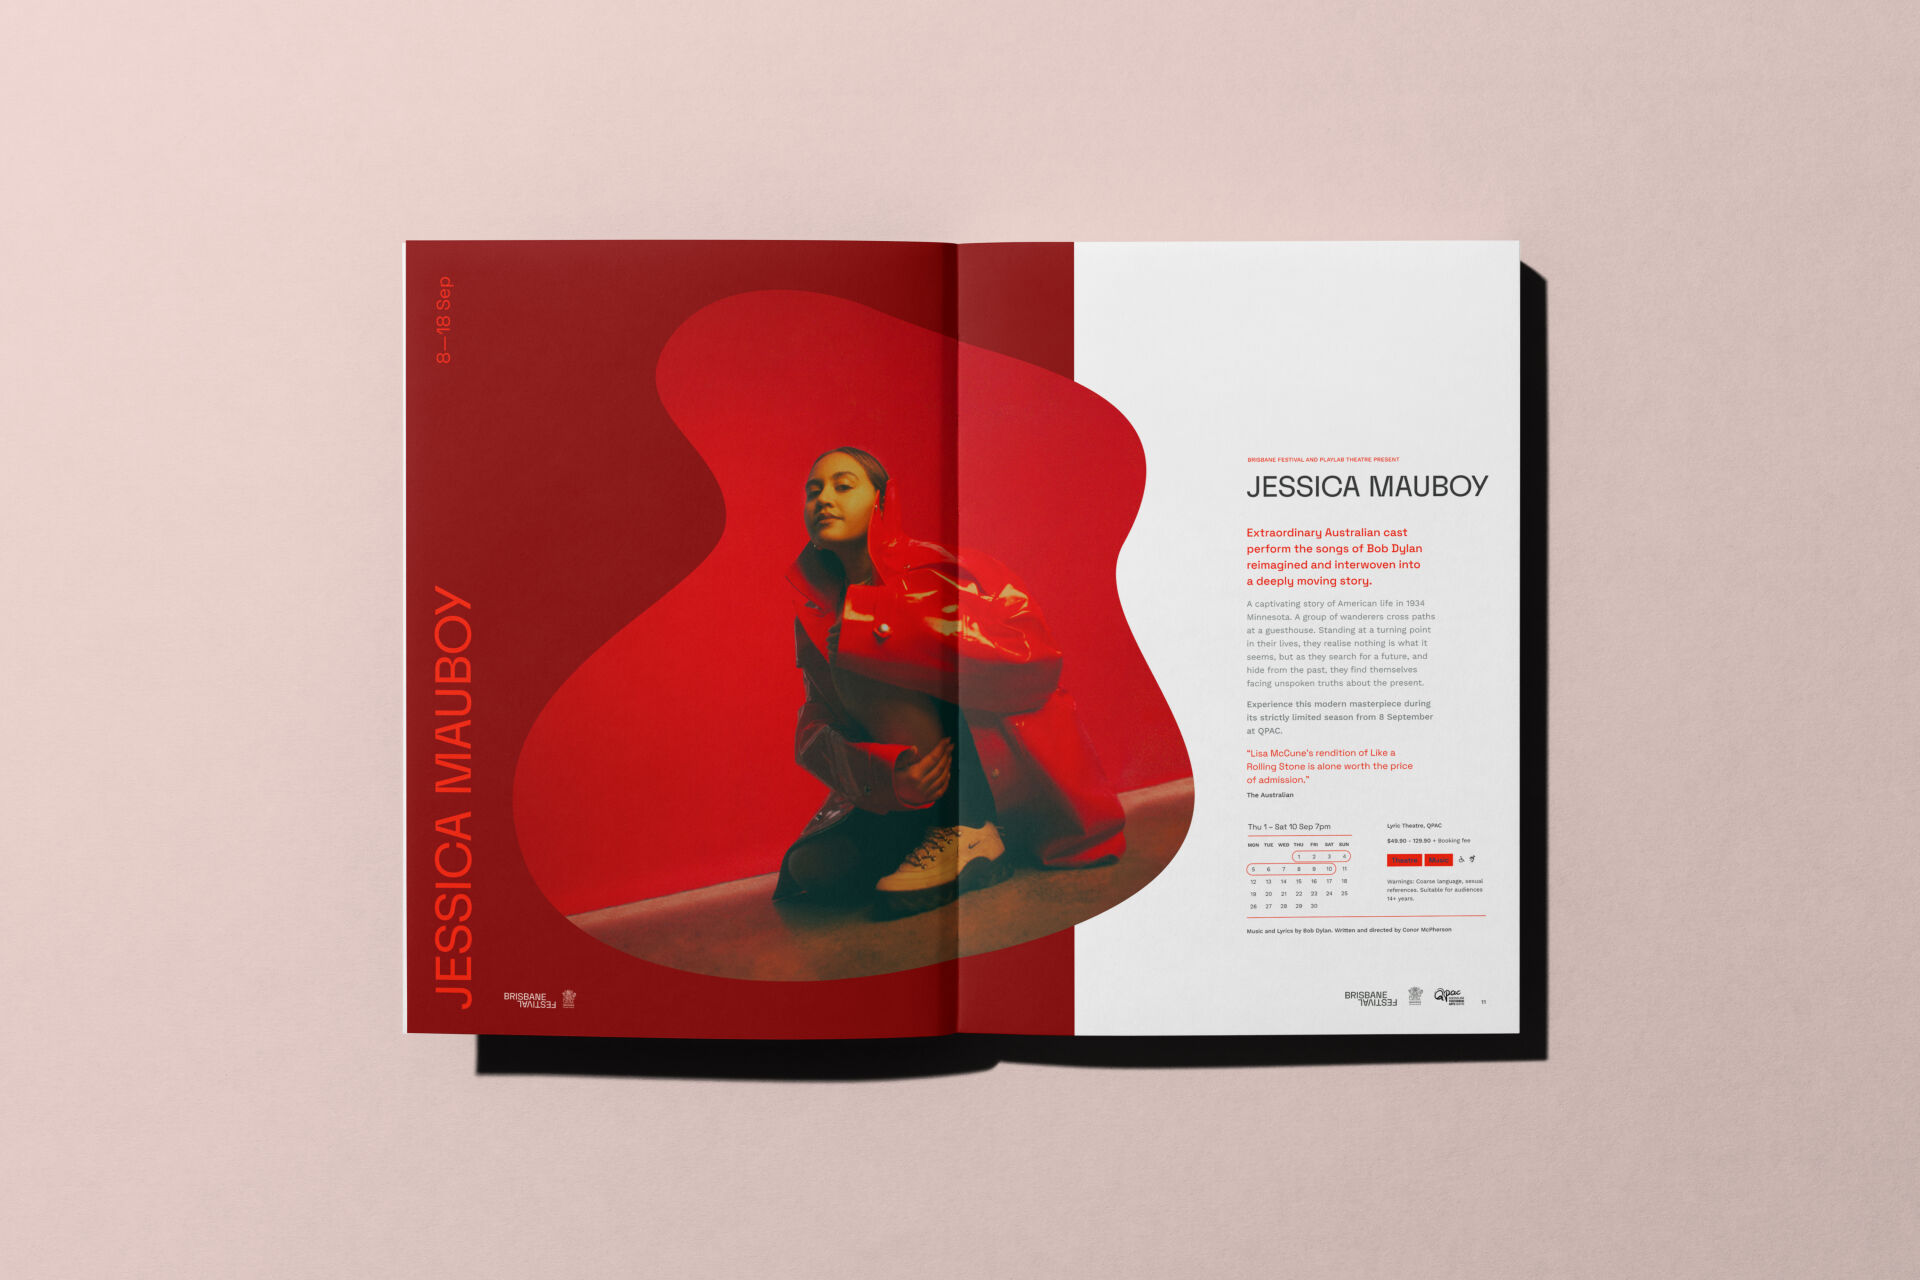 Internal spread design showcasing custom image shapes and colour palette